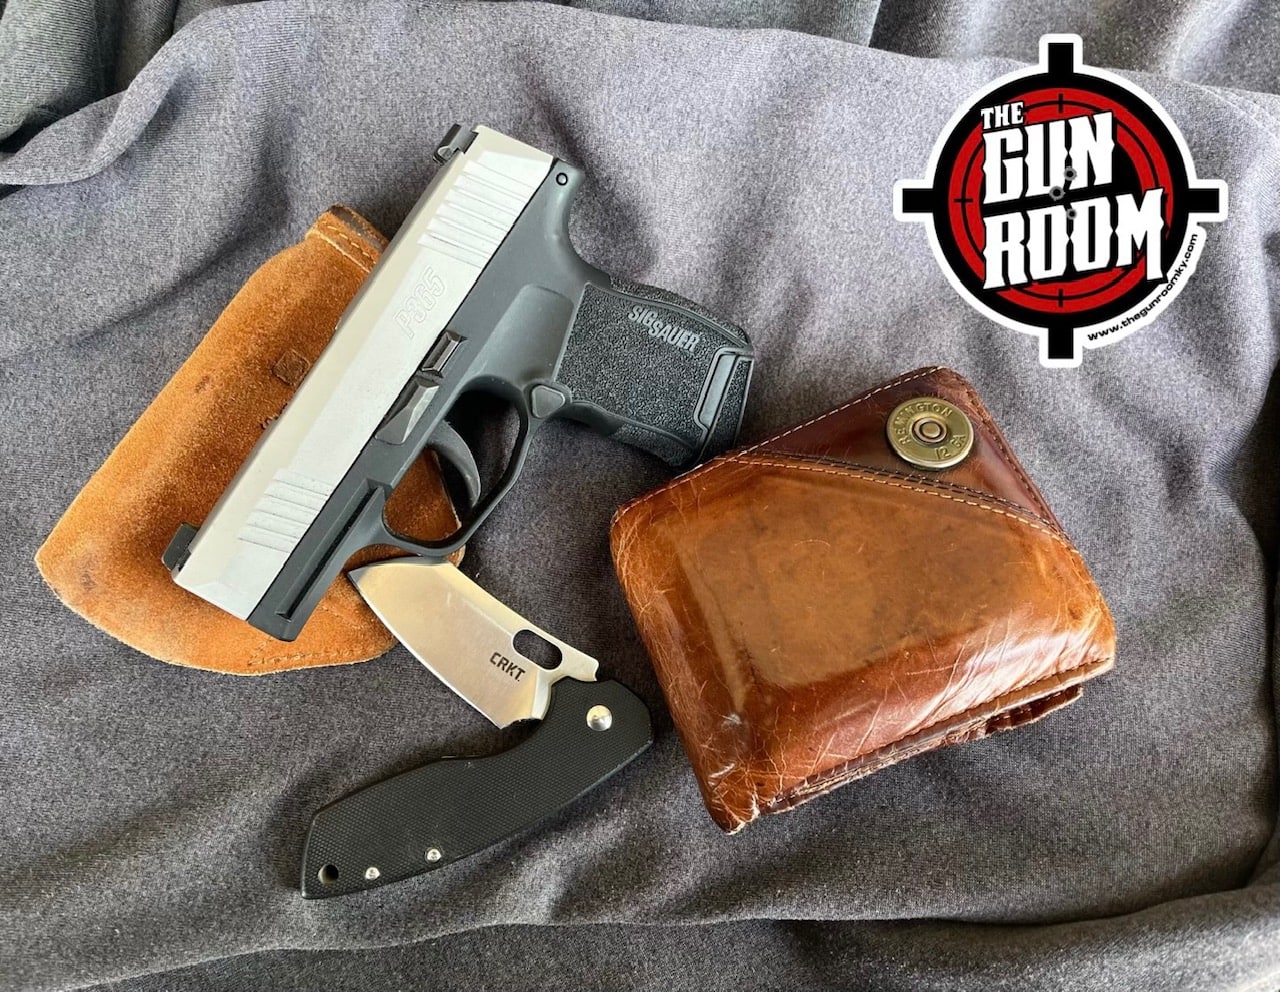 Discover The Gun Room: Your #1 Destination for Affordable Firearms, Accessories, Knives, and Optics 3 RDA Pic EDC jpg